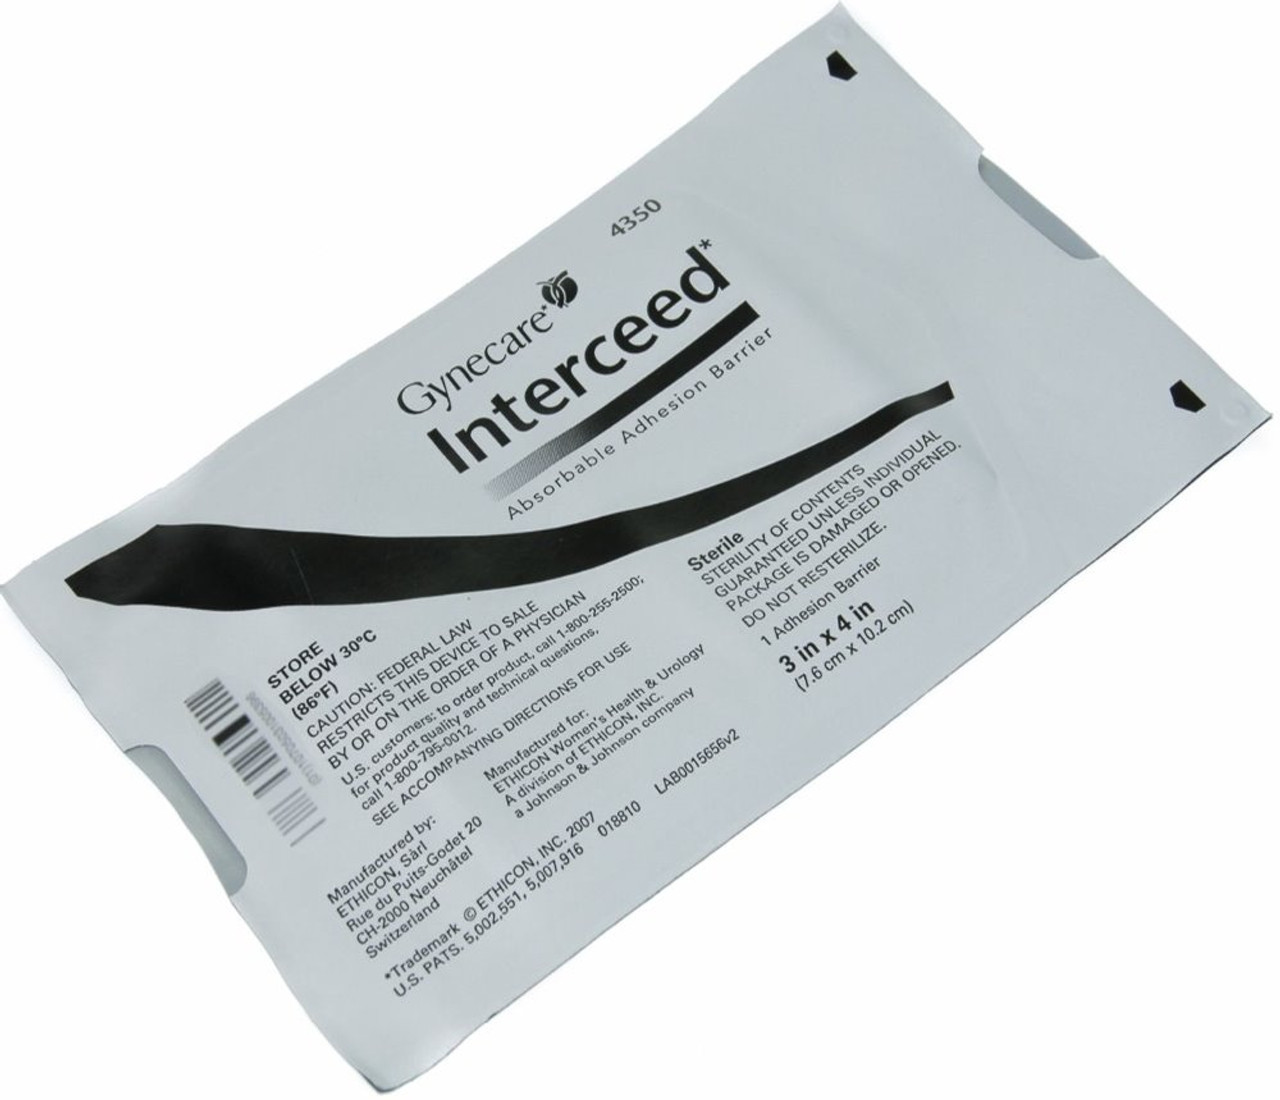 Gynecare 4350 - Interceed Absorbable Adhesion Barrier (3" x 4")